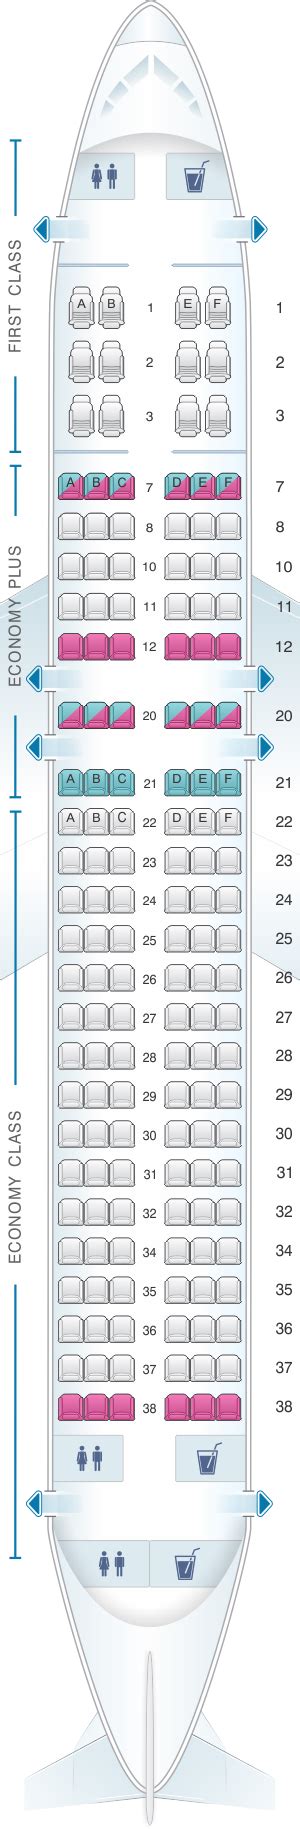 Planes & Seat Maps Airbus A320 (320) Layout 1 Airbus A320 (320) Layout 2 Airbus A321 (321) Layout 1 Airbus A321 (321) Layout 2 Boeing 787-8 (788) Check-in Baggage Infants Minors Pets There are 2 versions of this aircraft. Check Version Seat(s) Class .... 